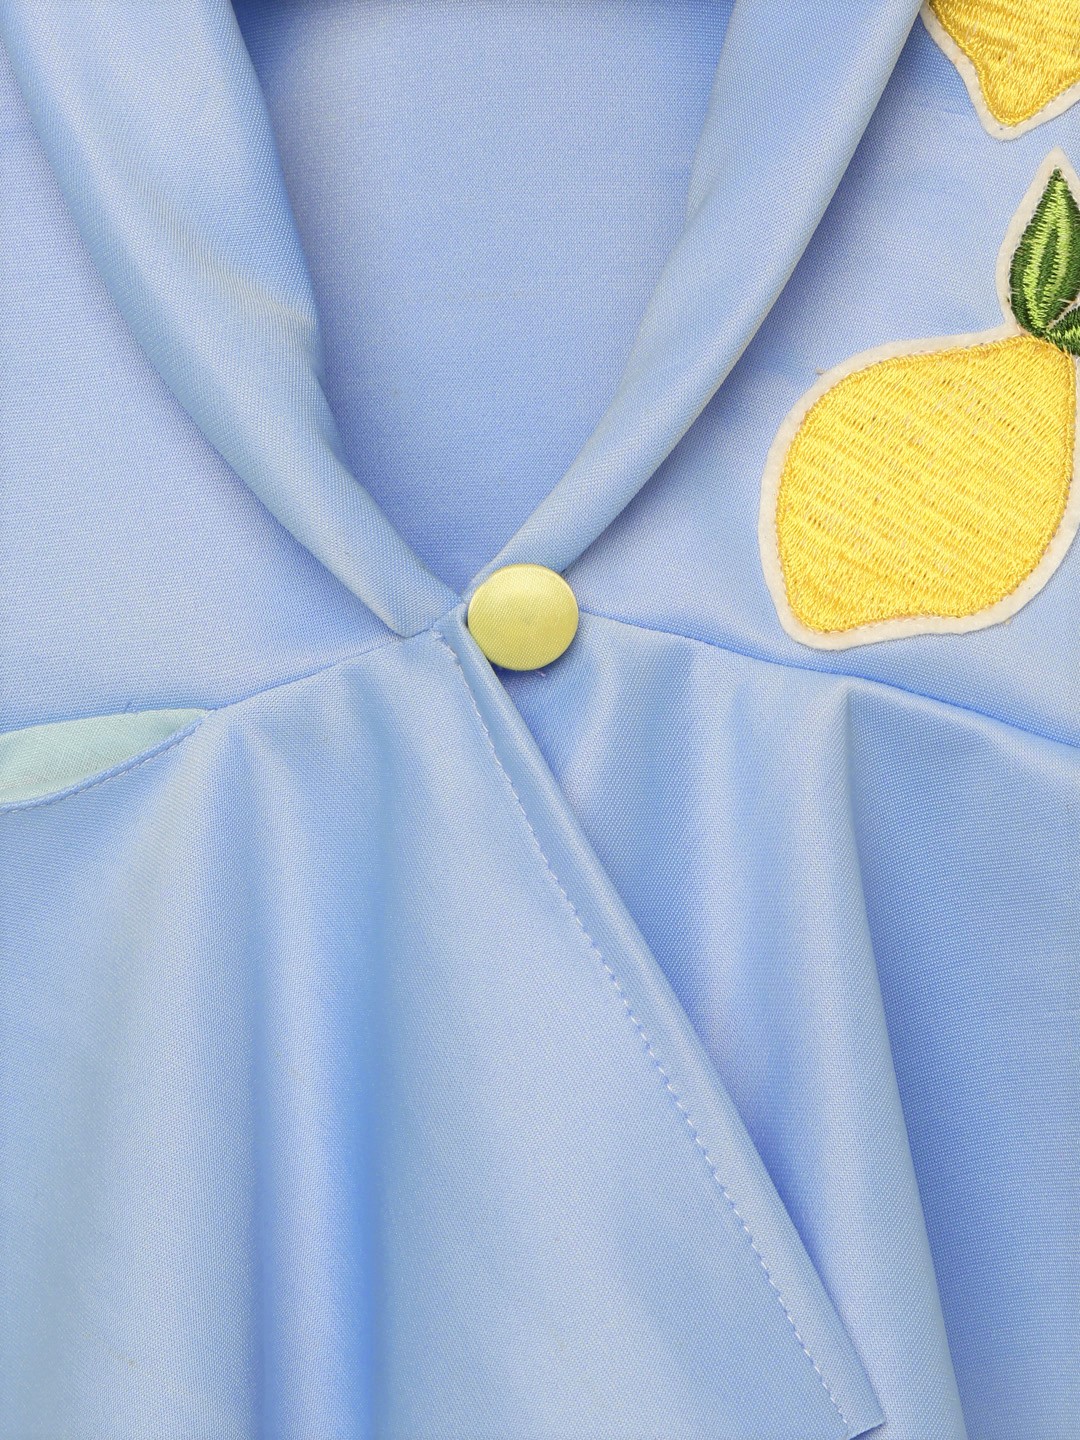 9 2 Gown with Lemon Embroided Patch and Peplum Jacket